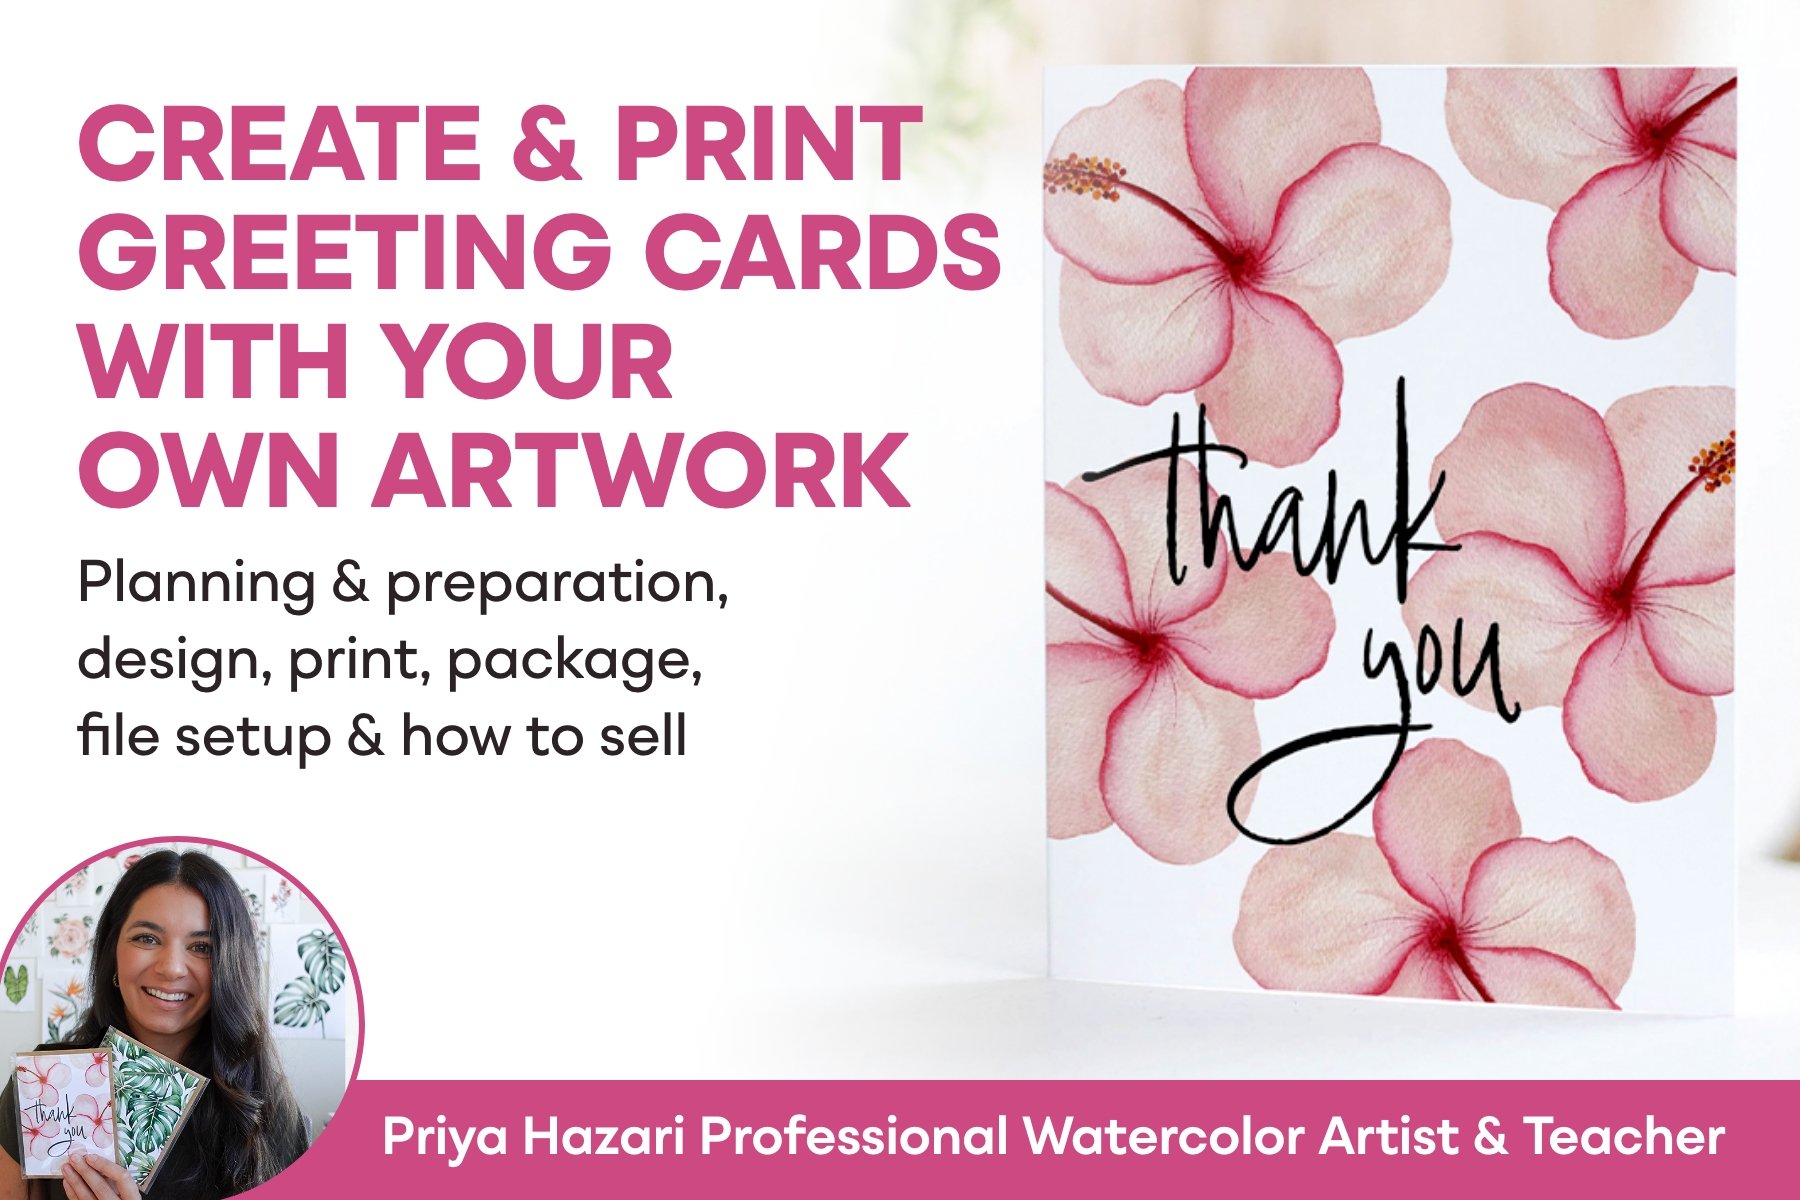 How To Create & Print Greeting Cards With Your Own Artwork